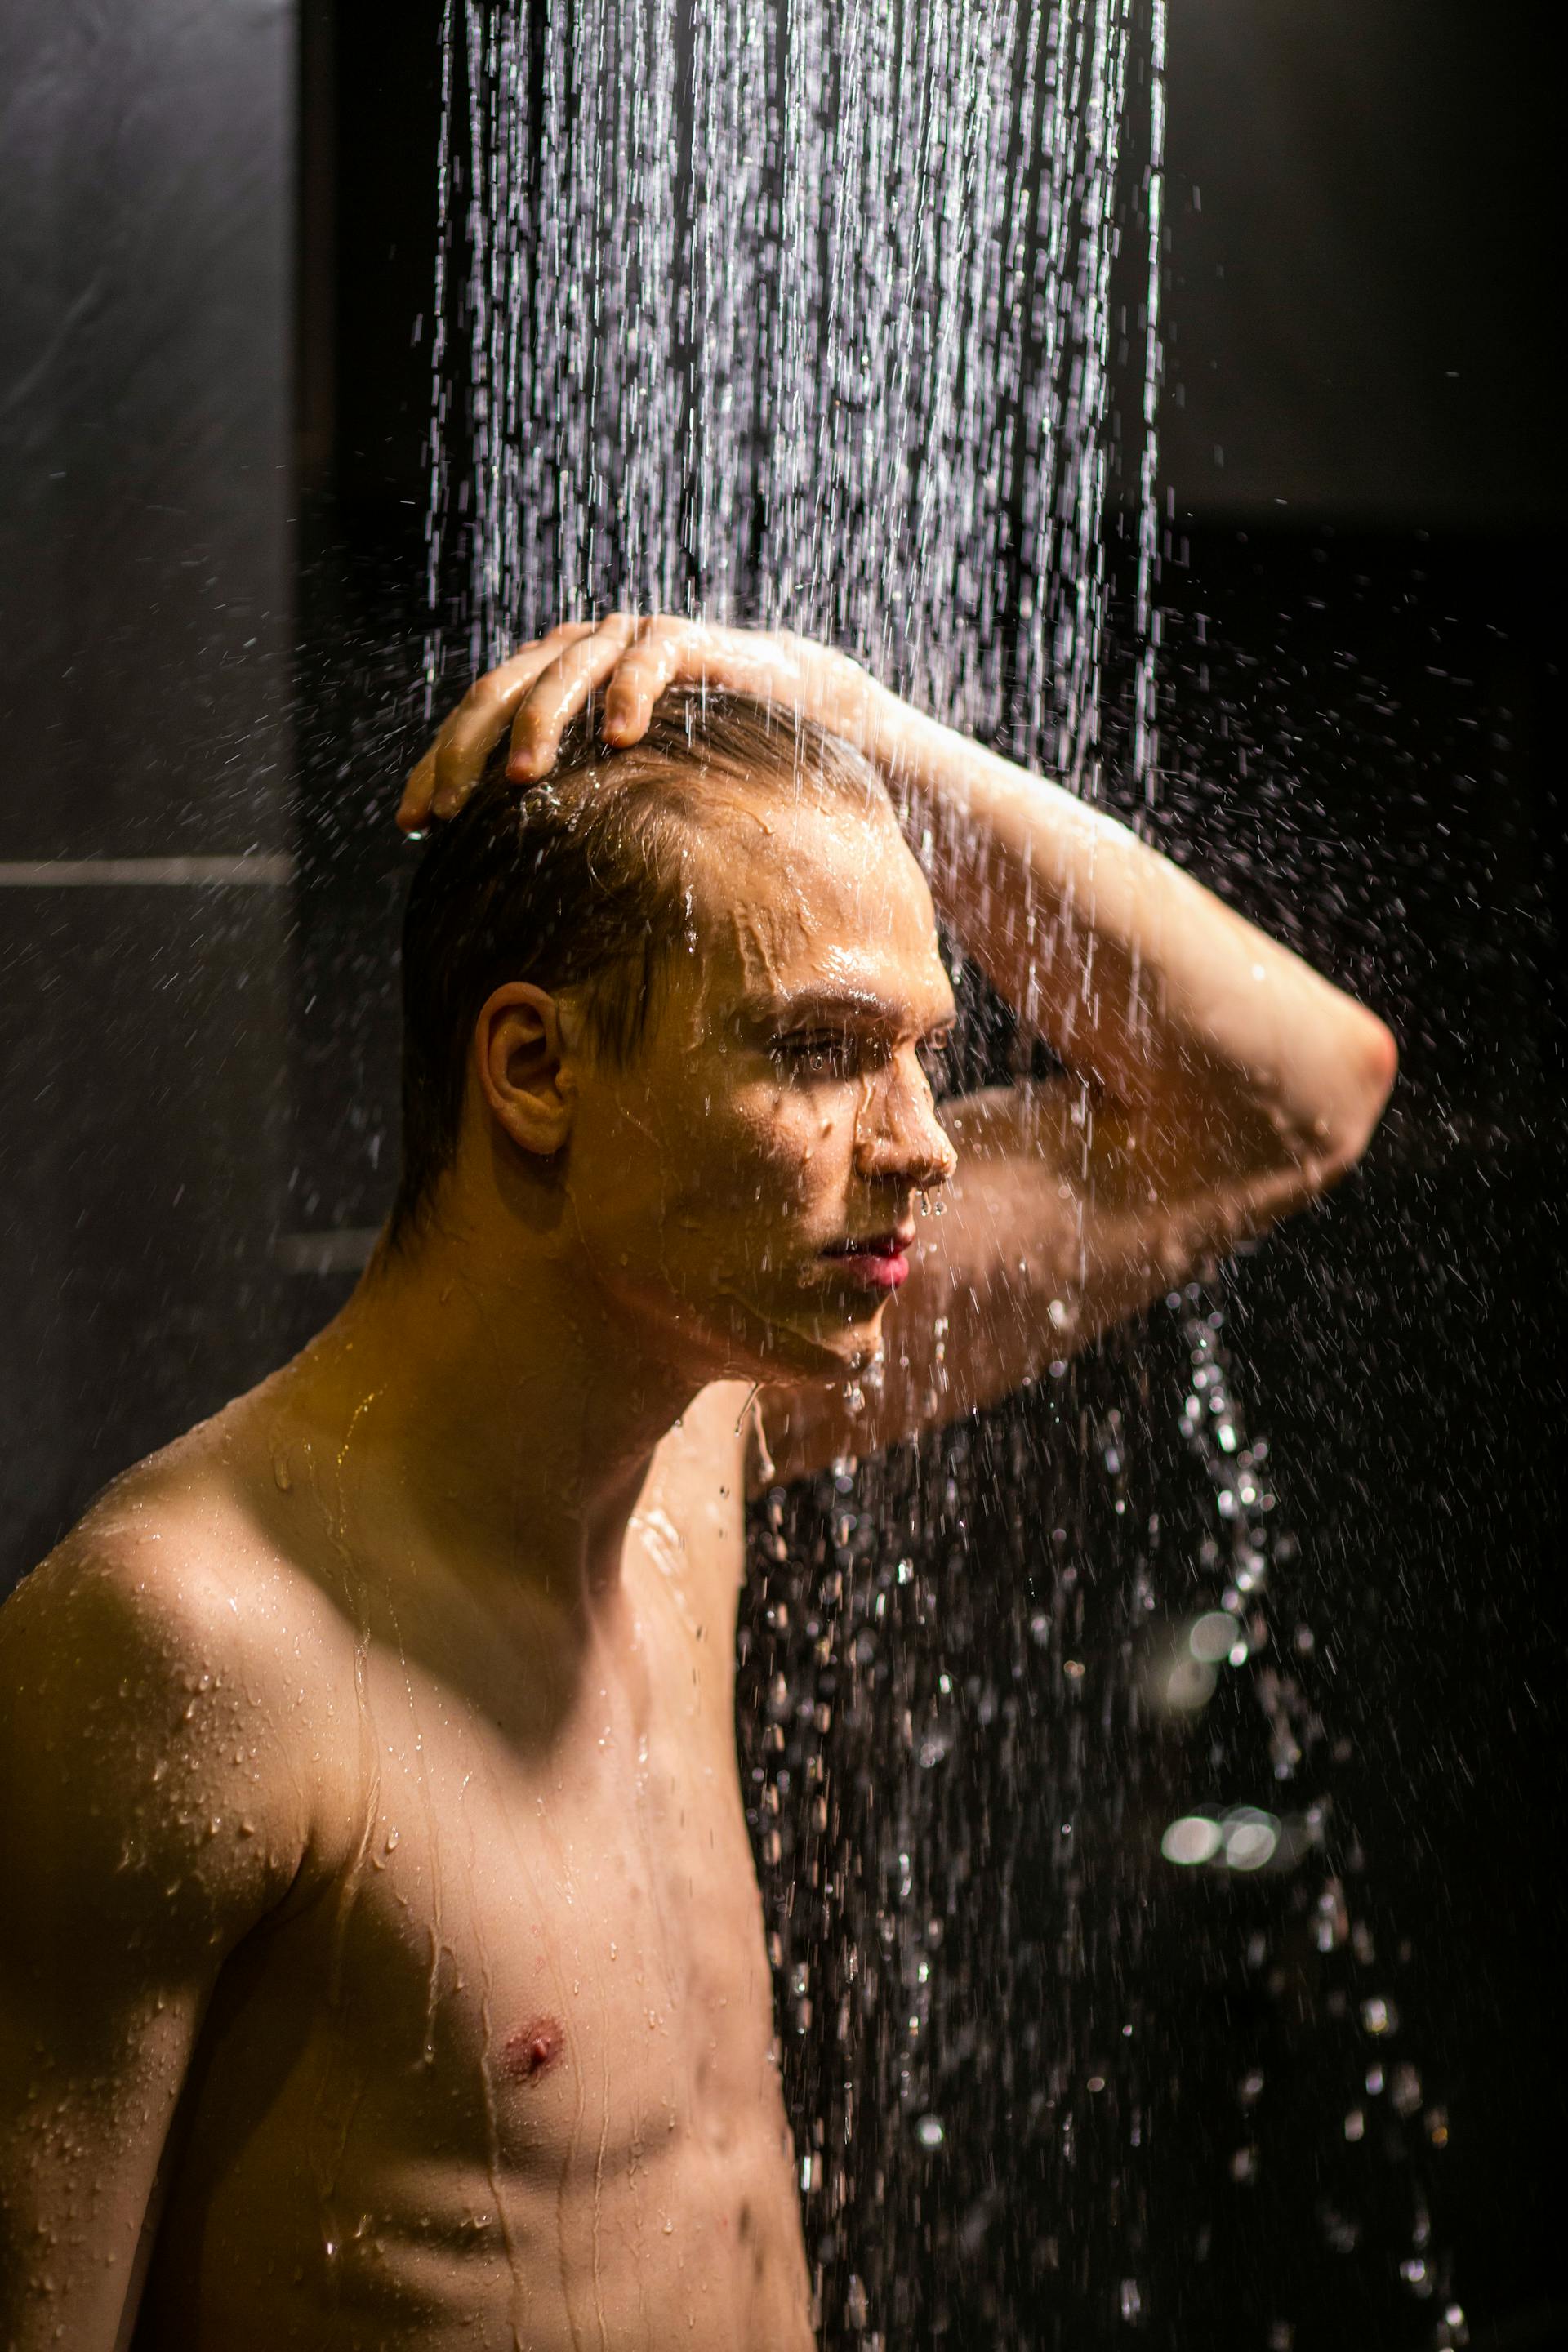 A man taking a shower | Source: Pexels